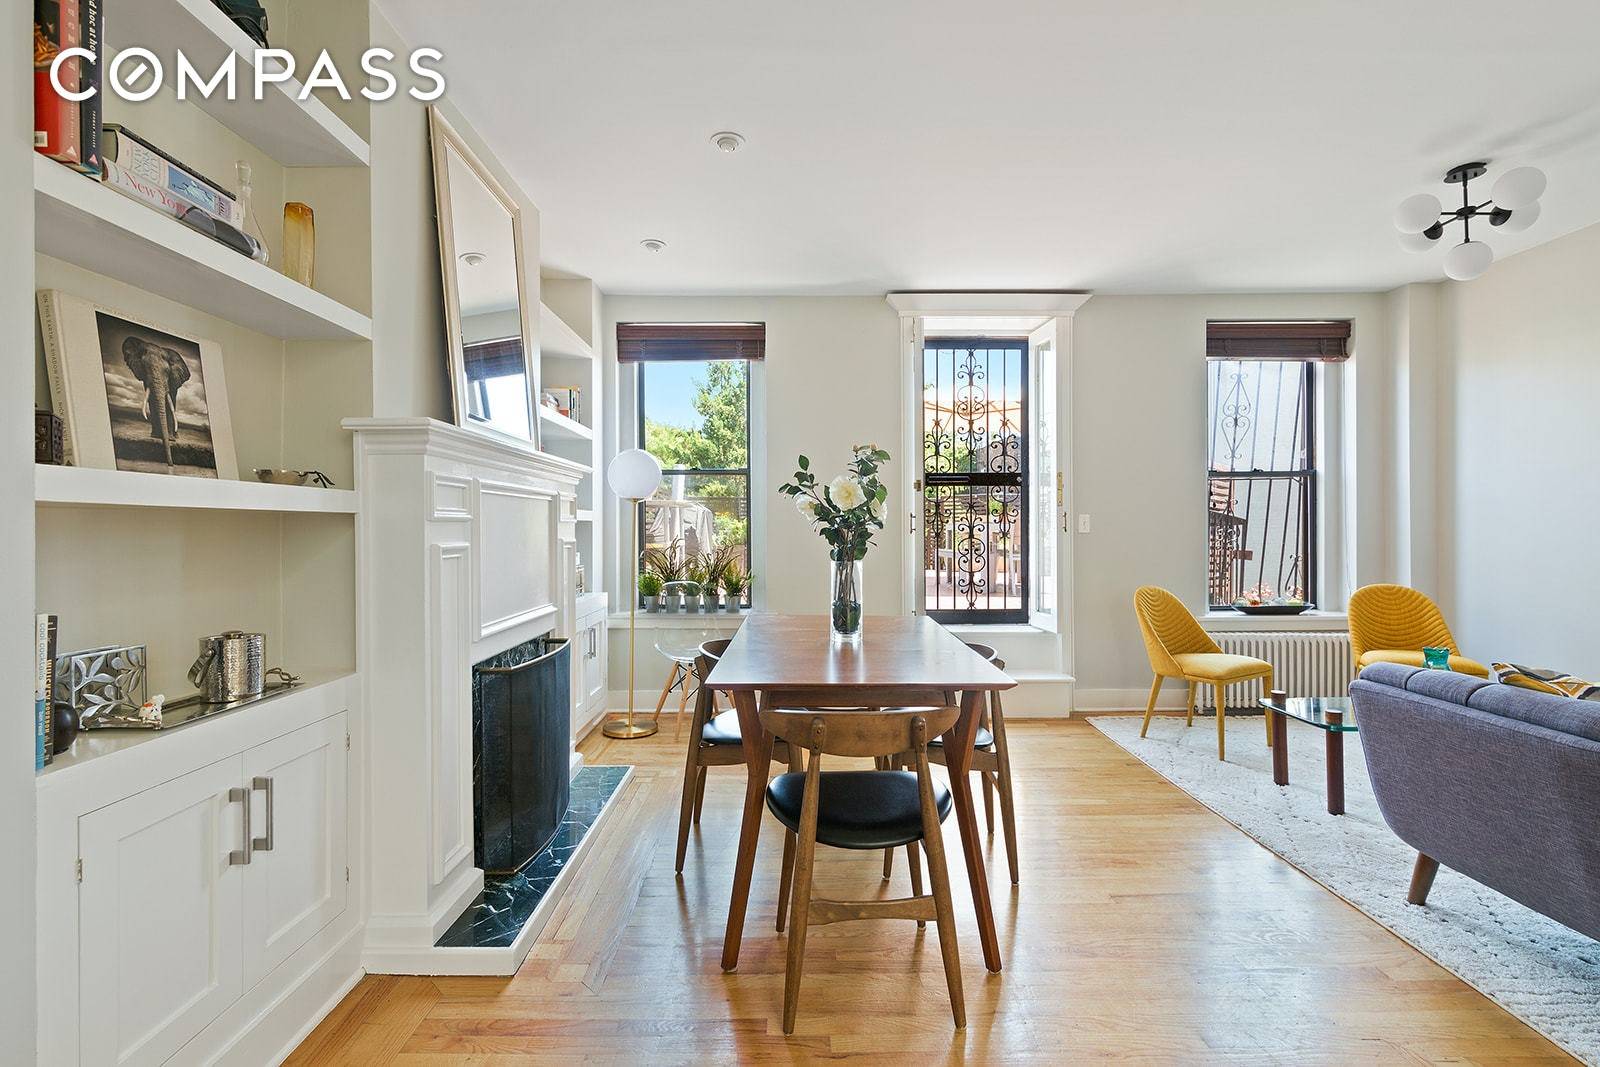 While the days away on your nearly 450 sq foot PRIVATE TERRACE at this well appointed 2 bedroom, 1 bath co op in Prime Park Slope.